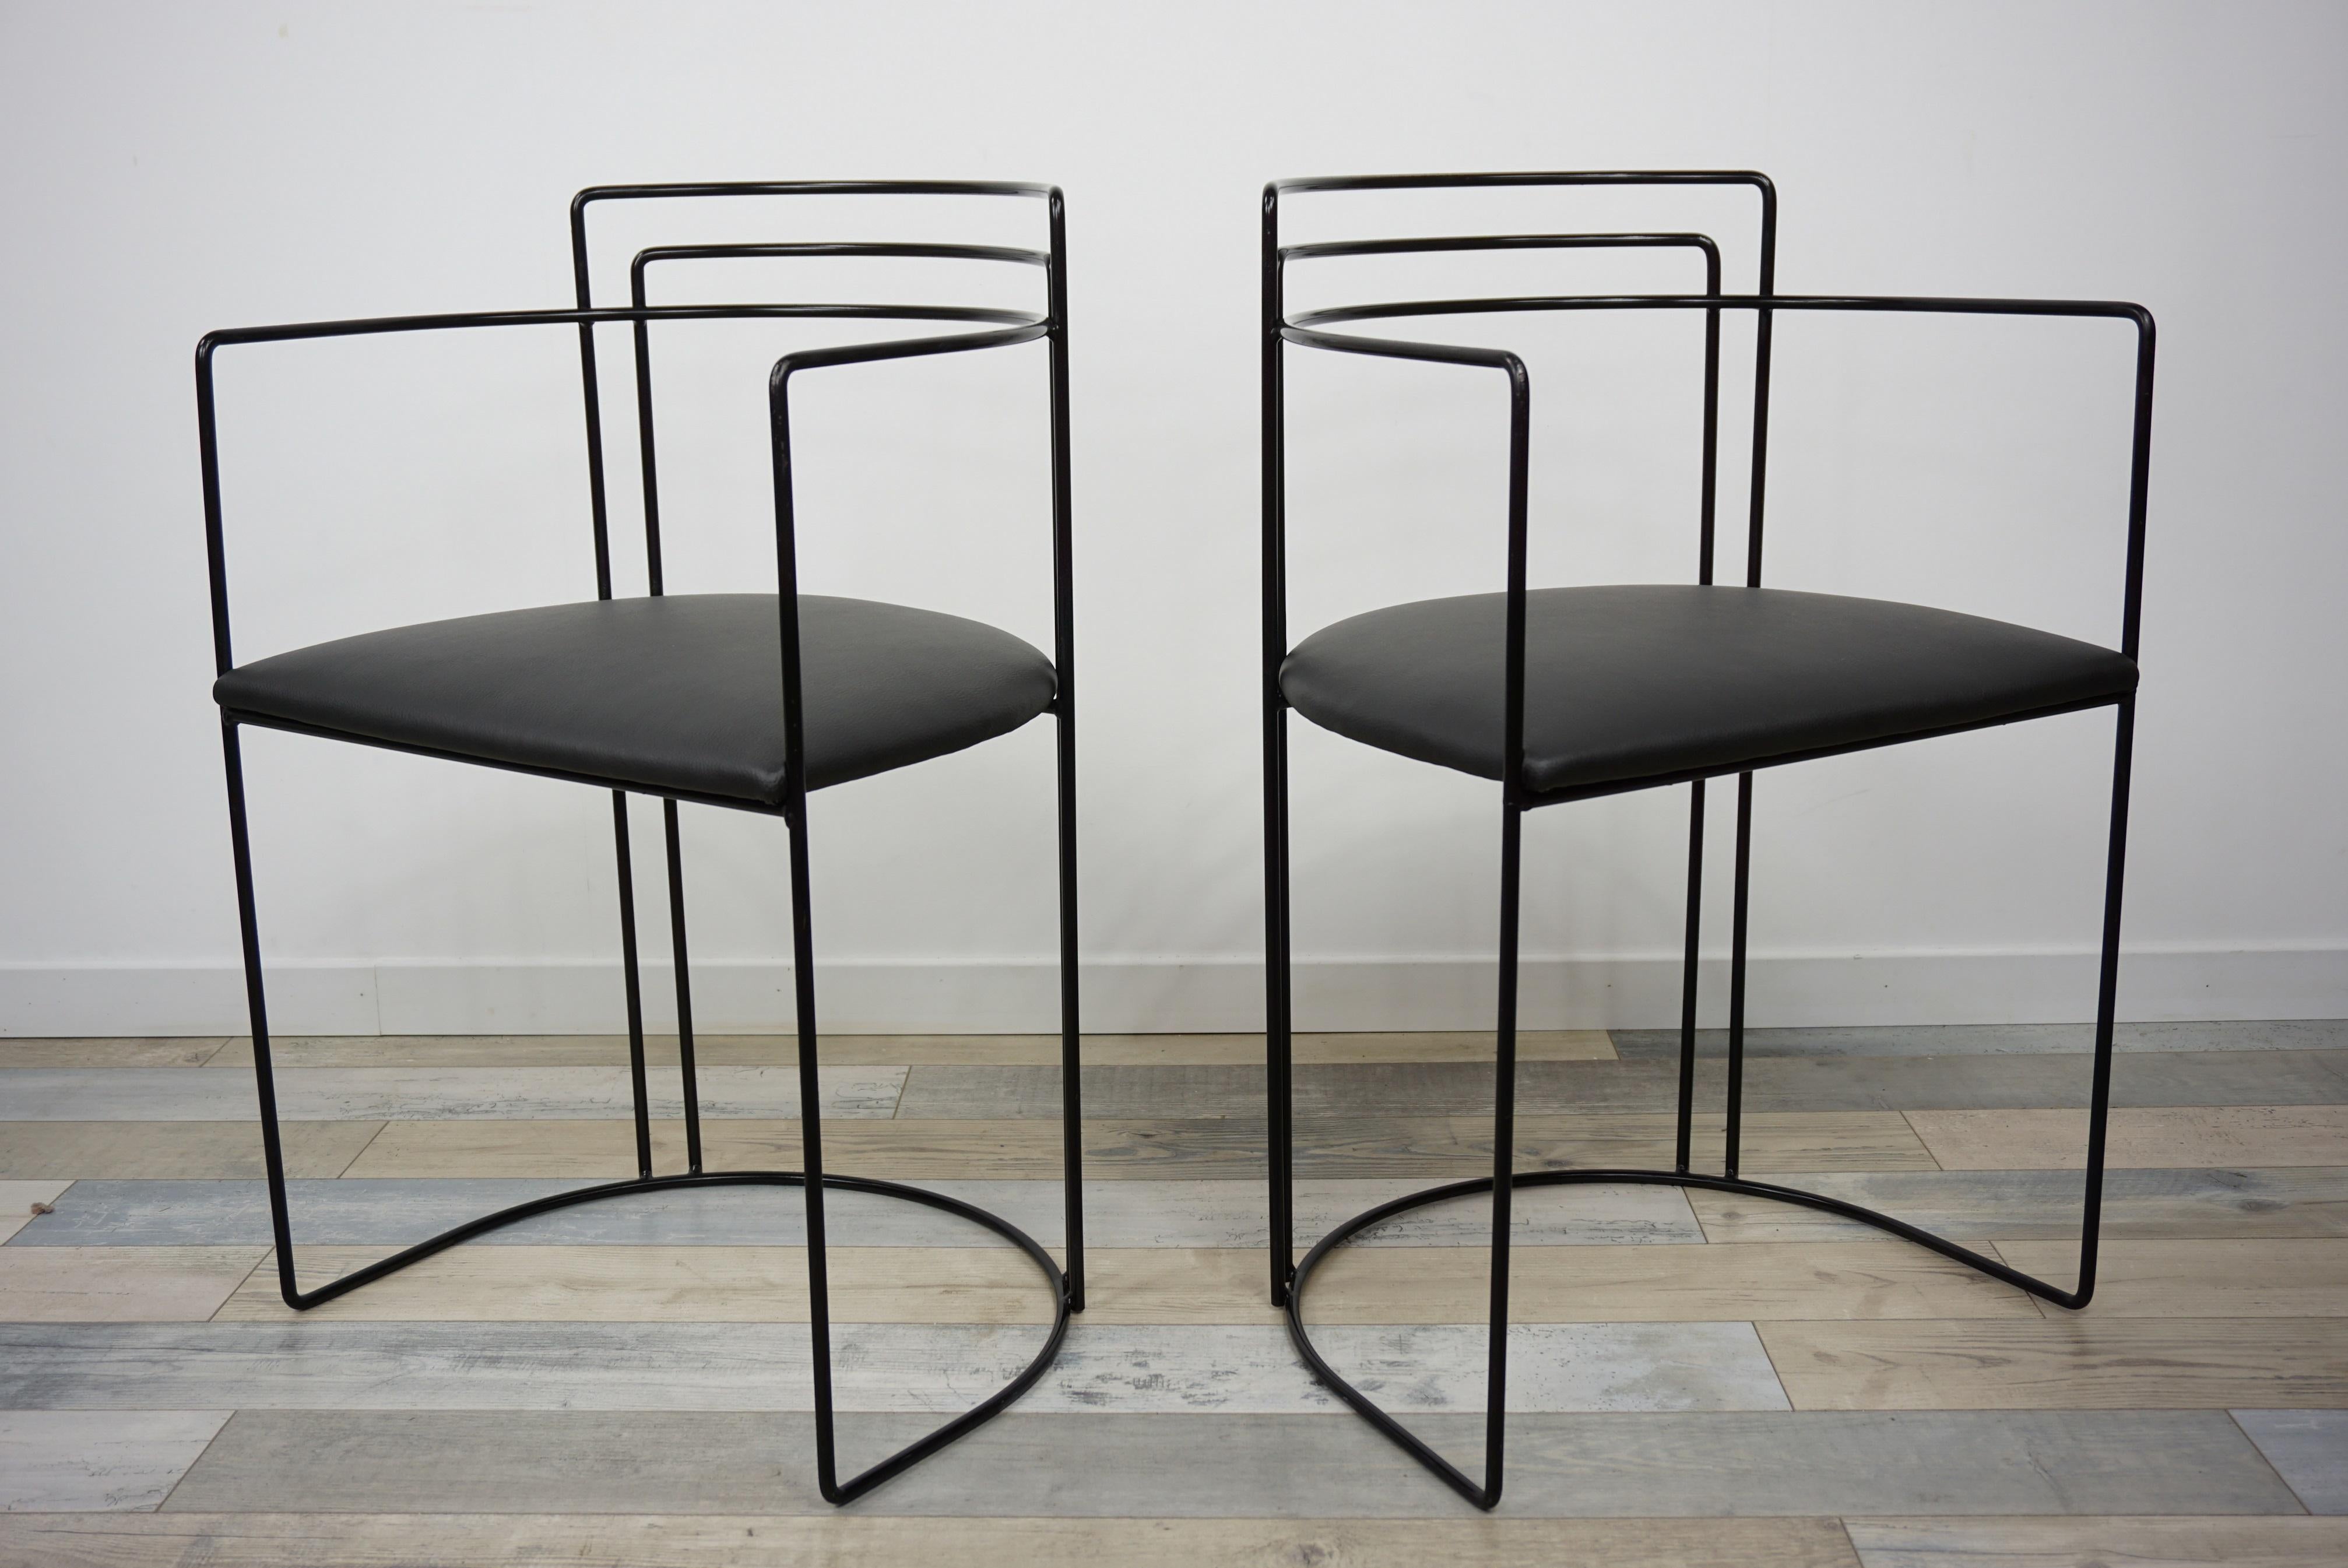 European 1980s Italian Design and Memphis Milano Style All in Black Pair of Chairs